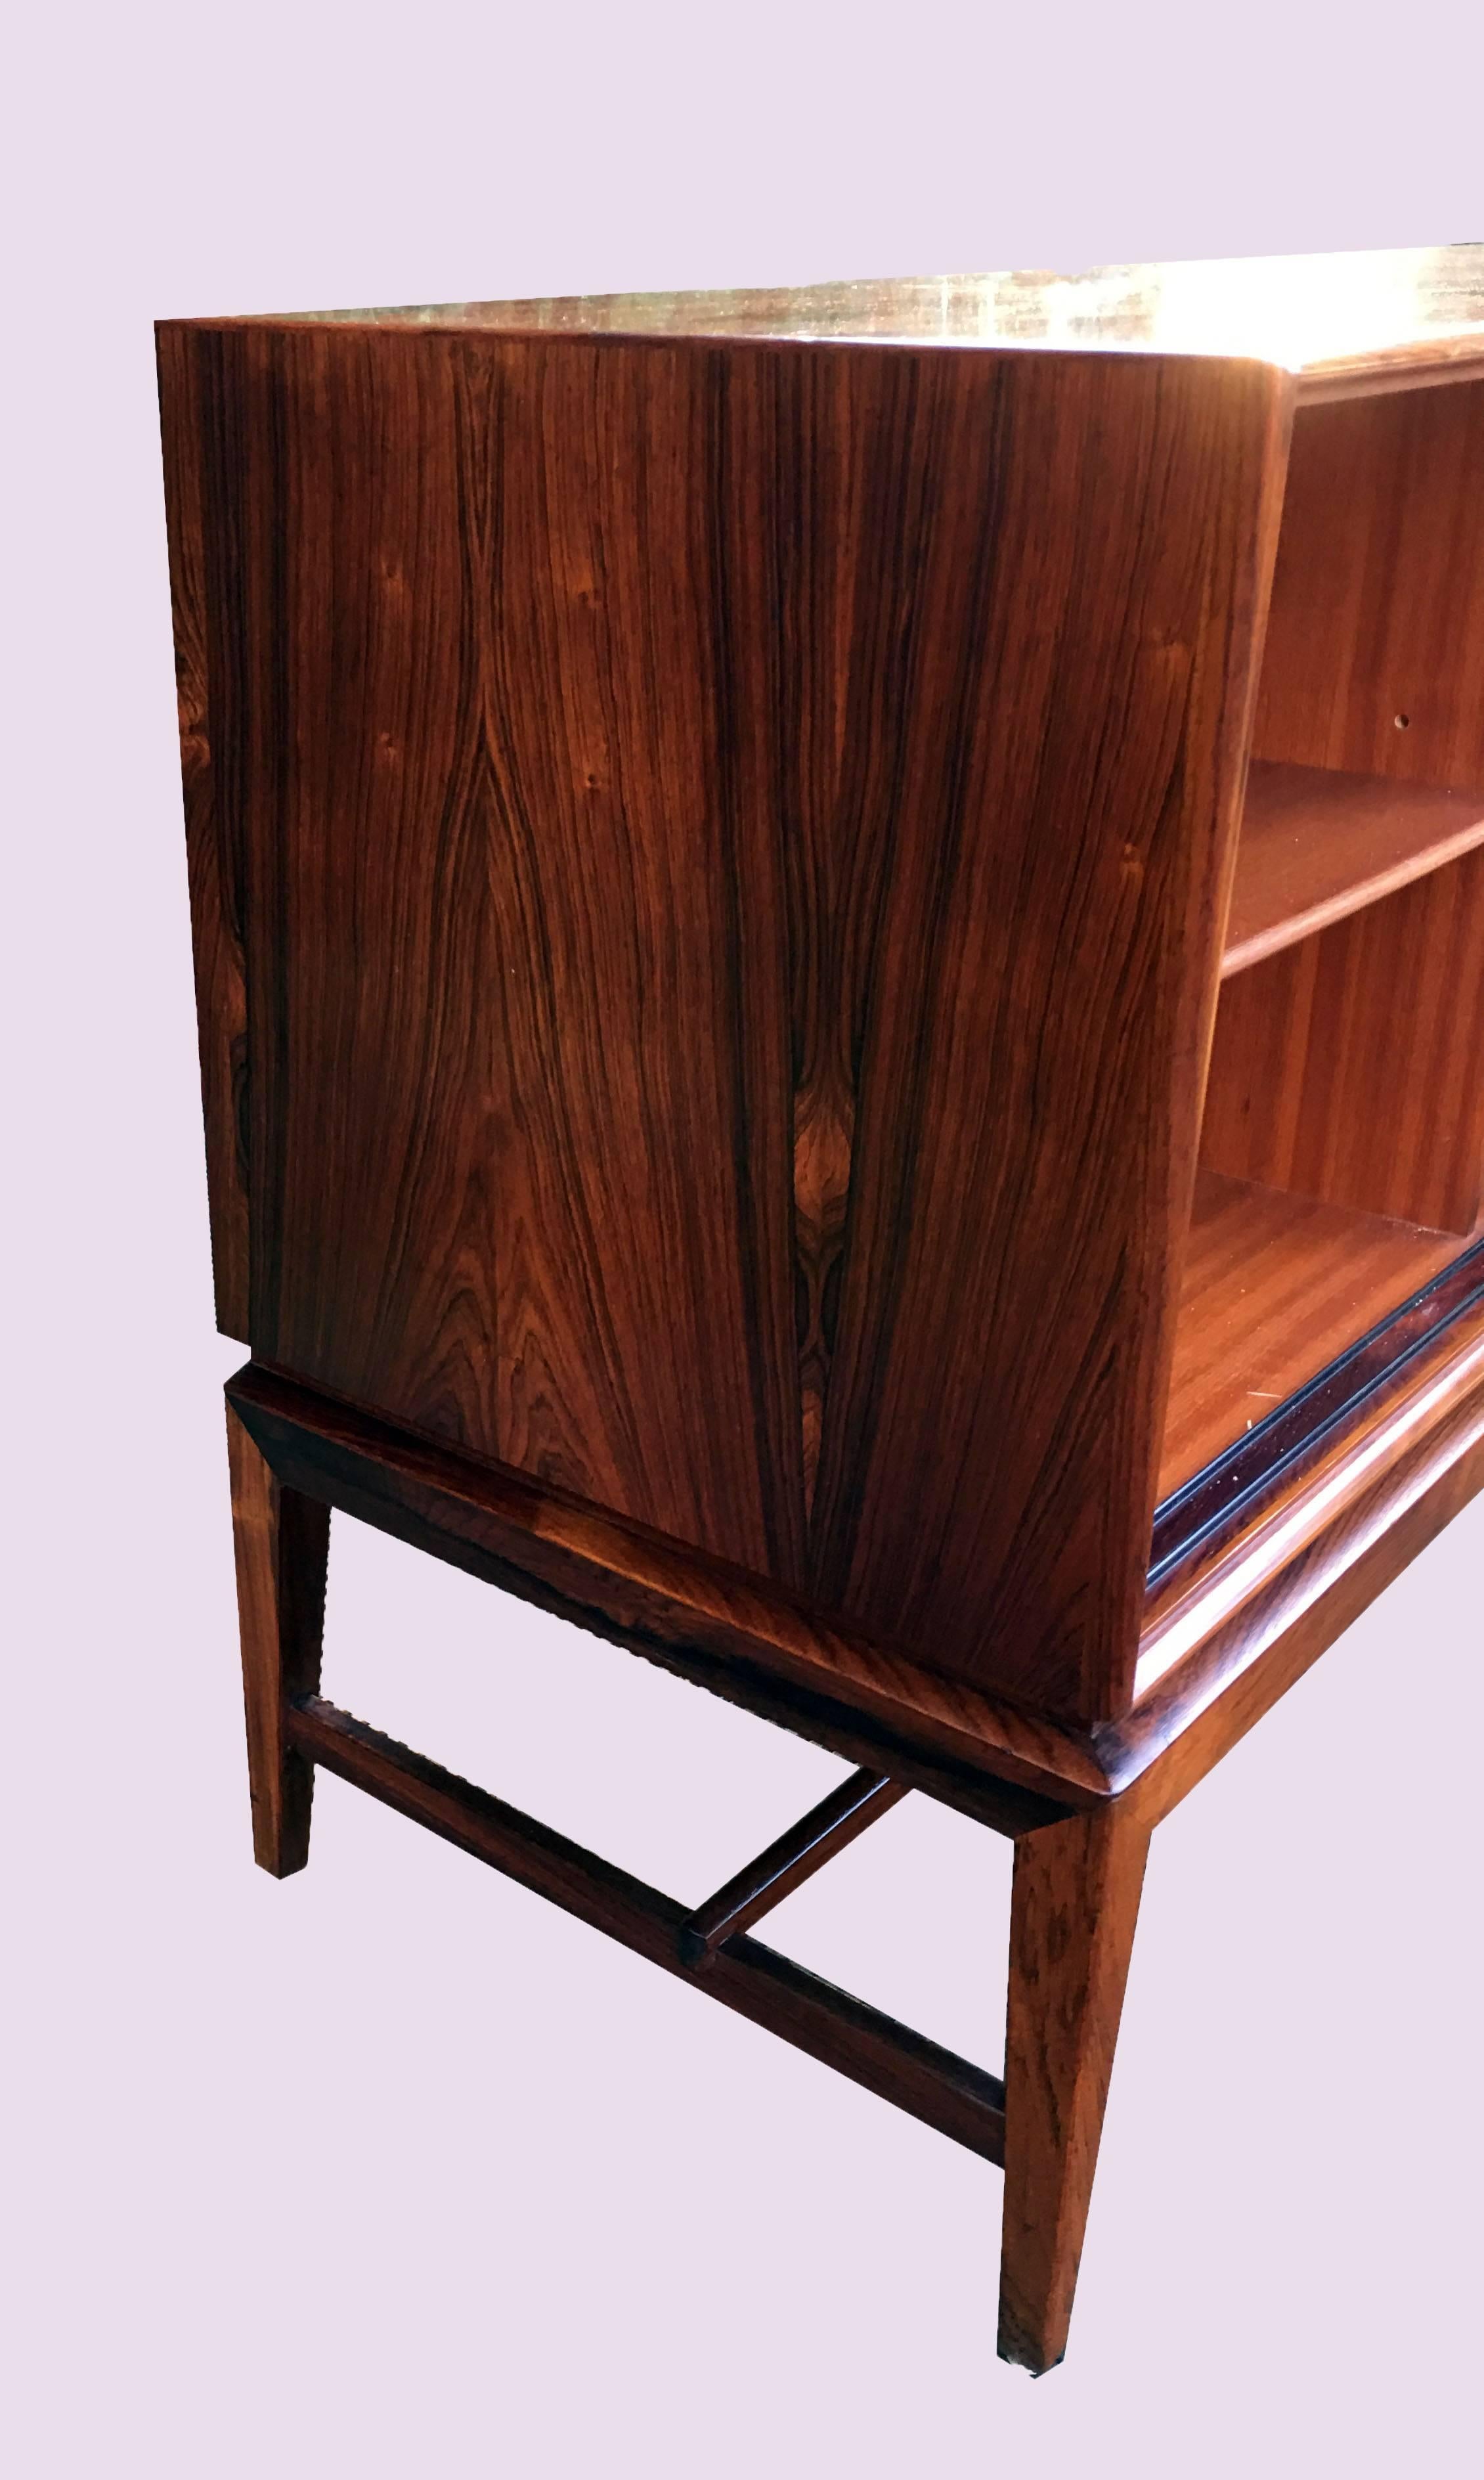 A beautiful long low Scandinavian rosewood sideboard or credenza designed by Severin Hansen for Haslev.
Beautiful grain and great condition.